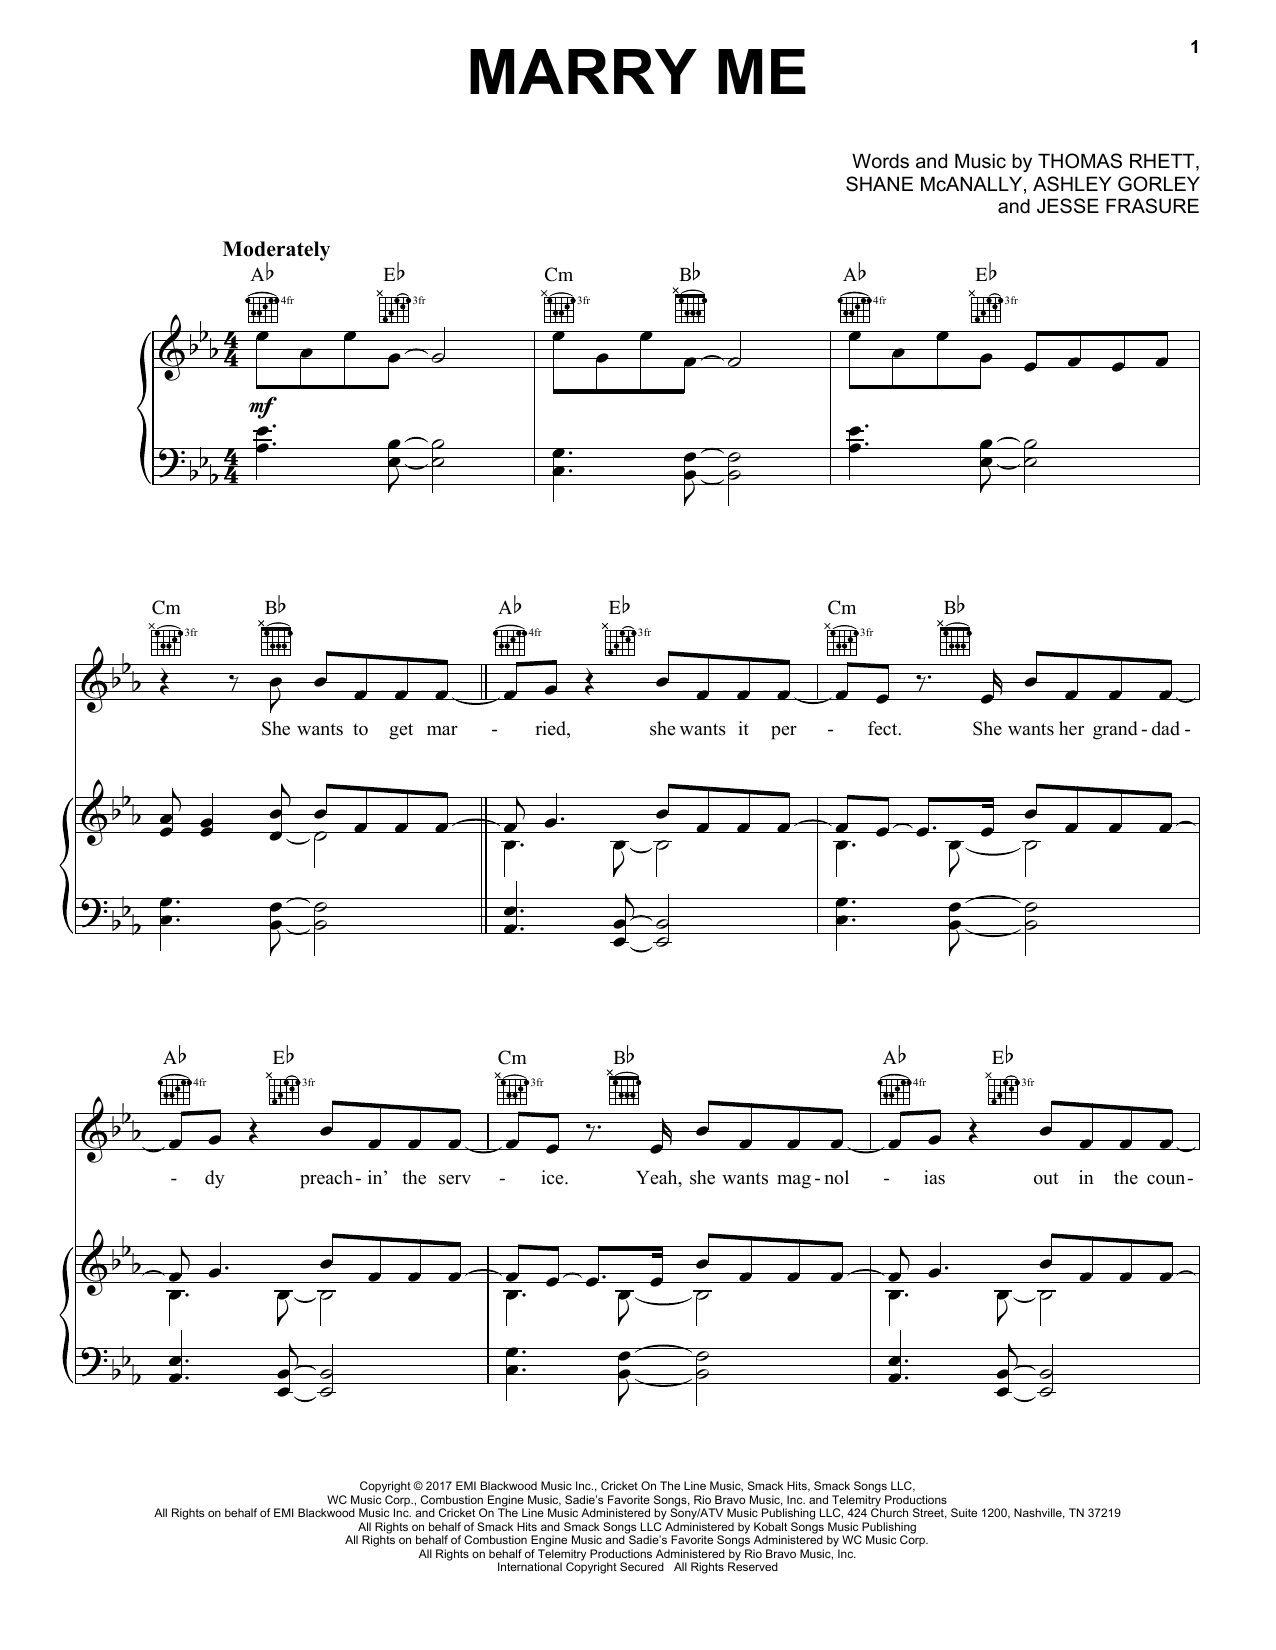 Download Thomas Rhett "Marry Me" Sheet Music & Chords for Piano, Vocal